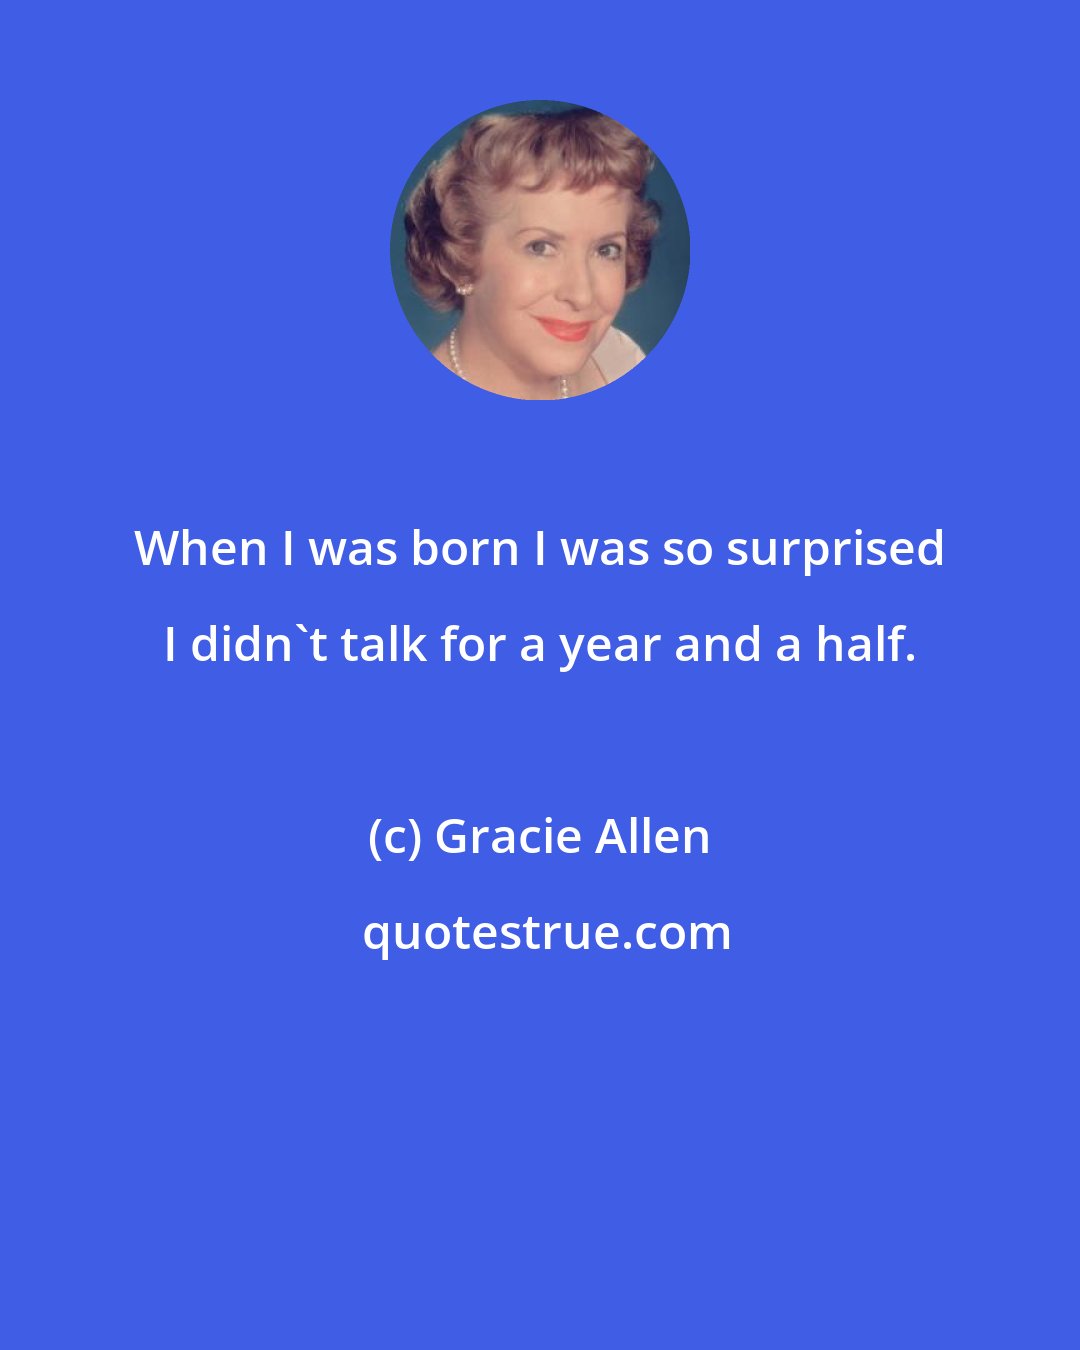 Gracie Allen: When I was born I was so surprised I didn't talk for a year and a half.